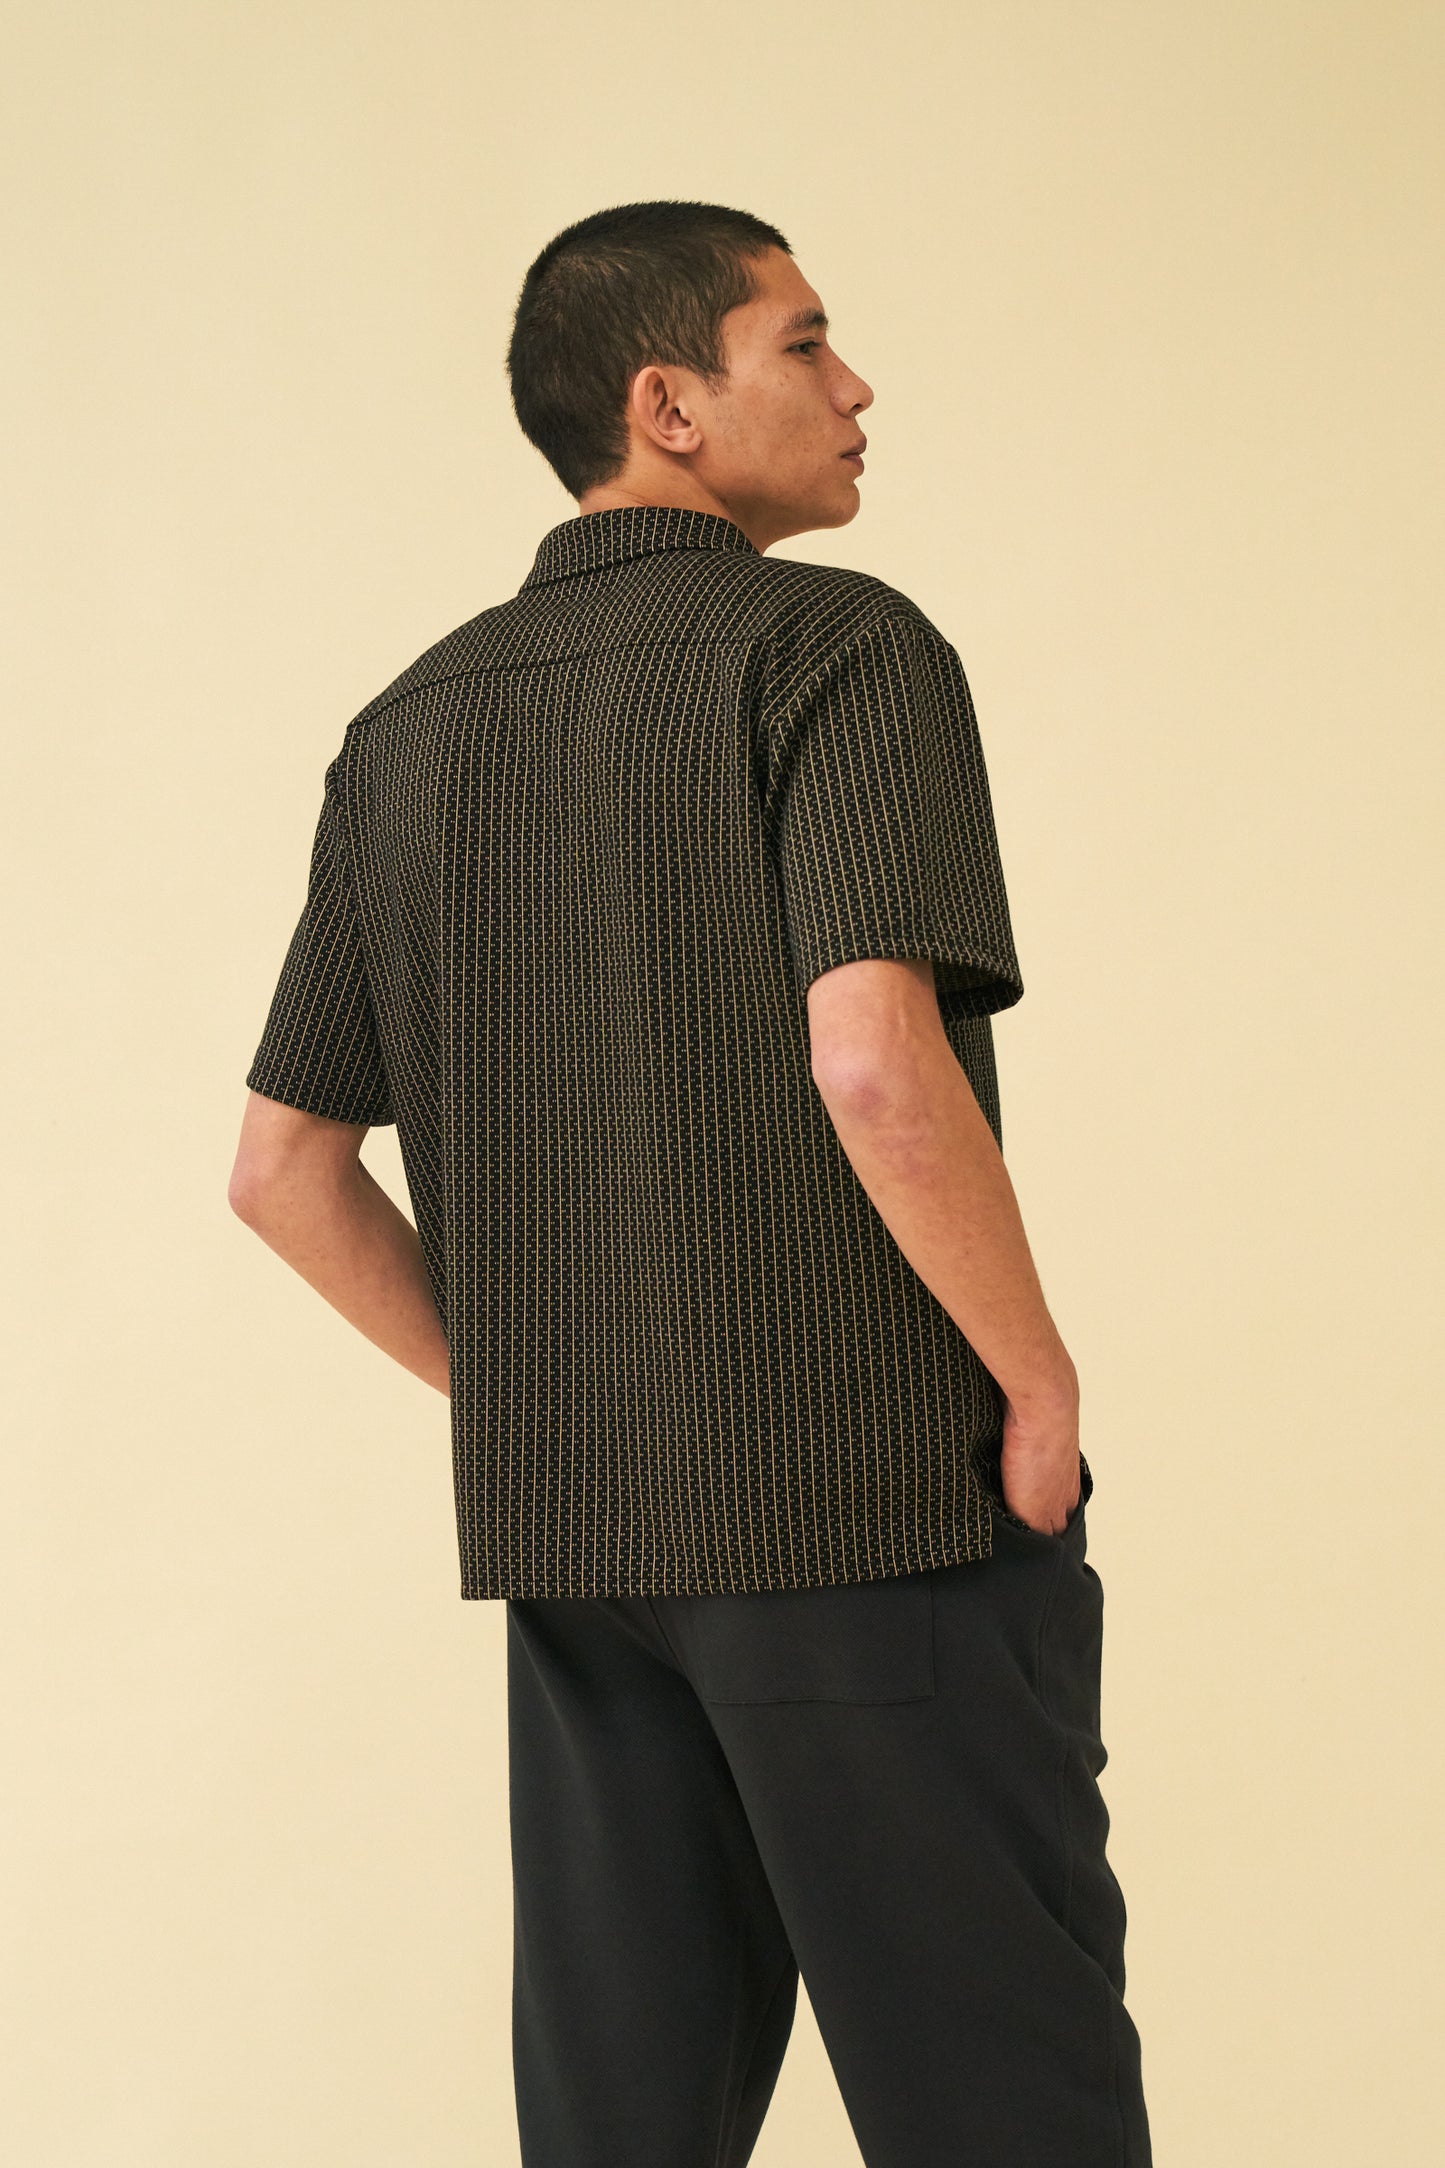 bound 'Oscuro' Patterned Textured Polo Shirt - Black